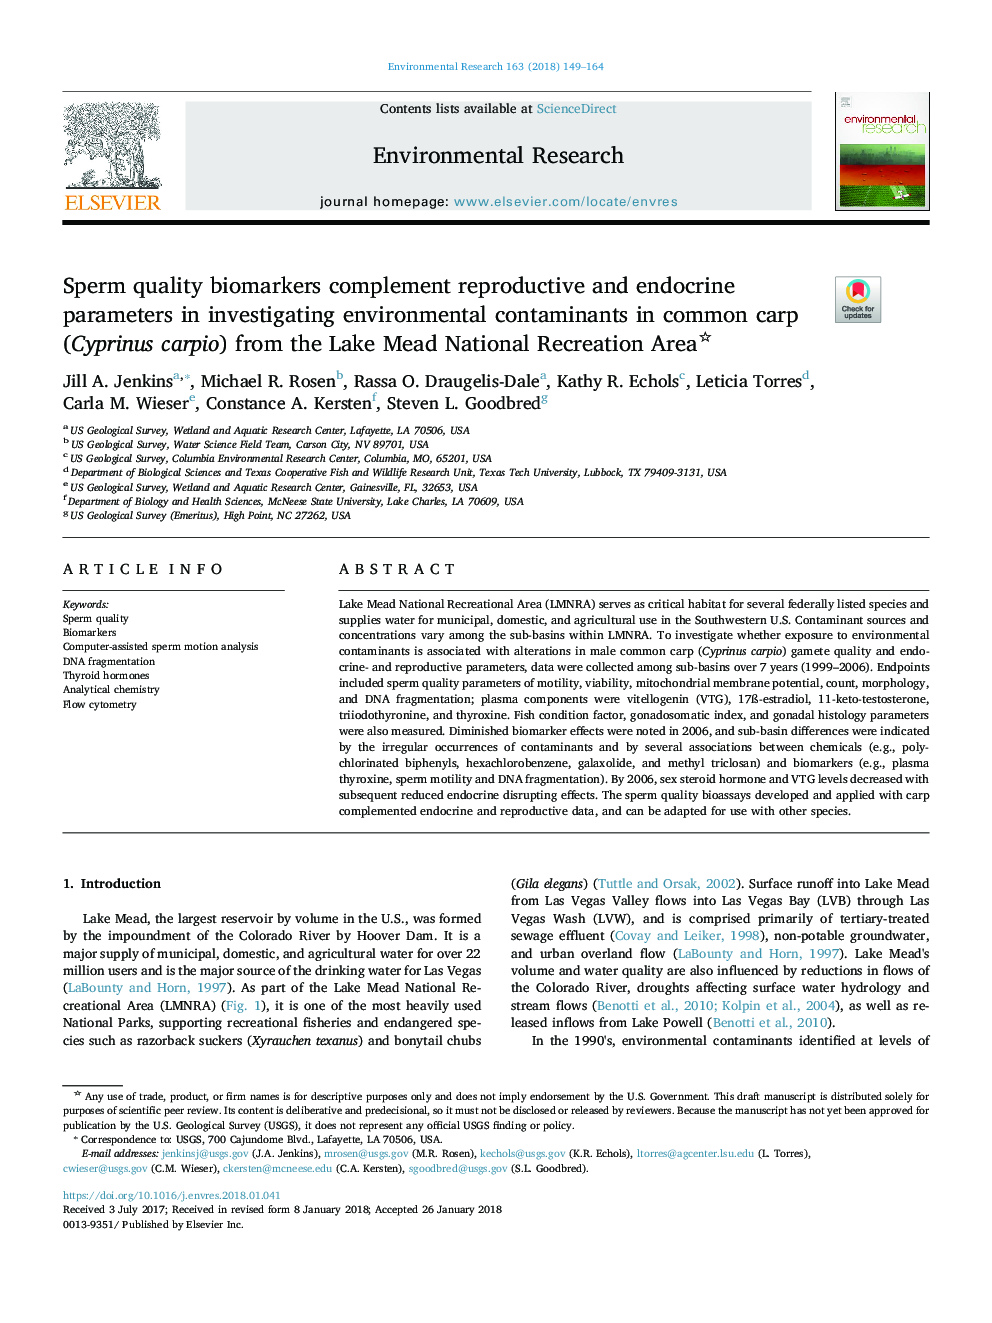 Sperm quality biomarkers complement reproductive and endocrine parameters in investigating environmental contaminants in common carp (Cyprinus carpio) from the Lake Mead National Recreation Area